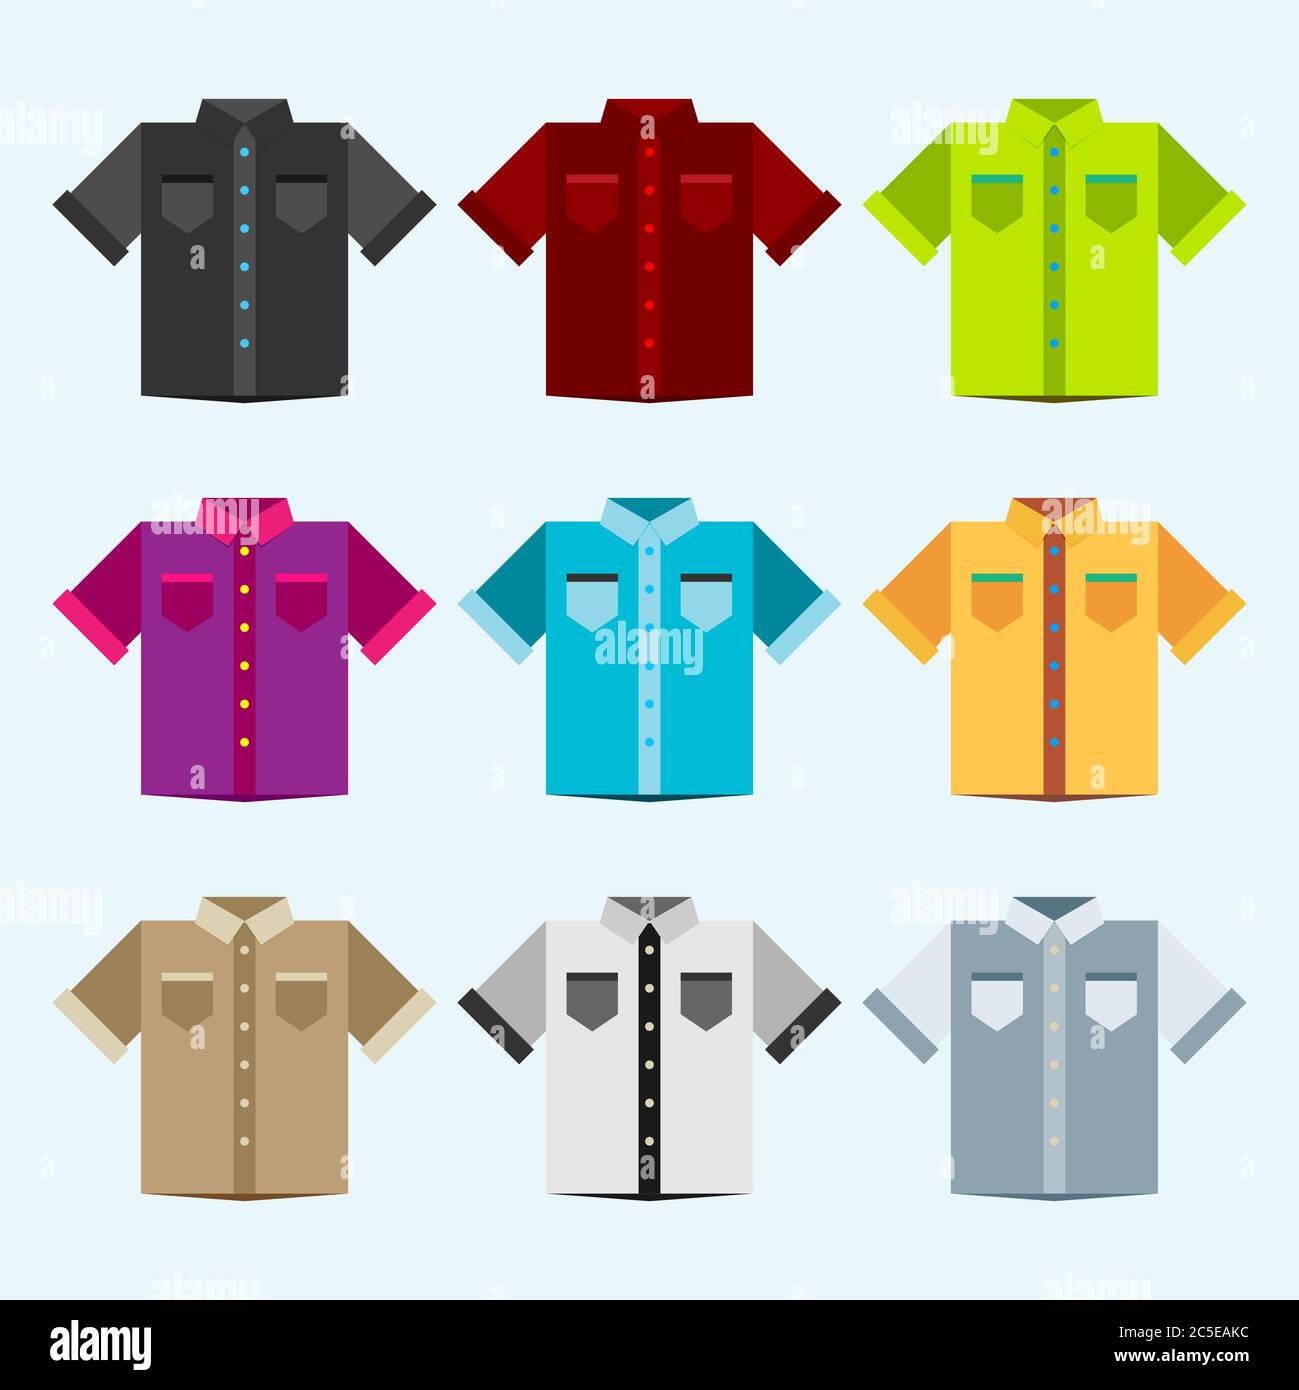 Shirts colored templates for your design in flat style. Stock Vector